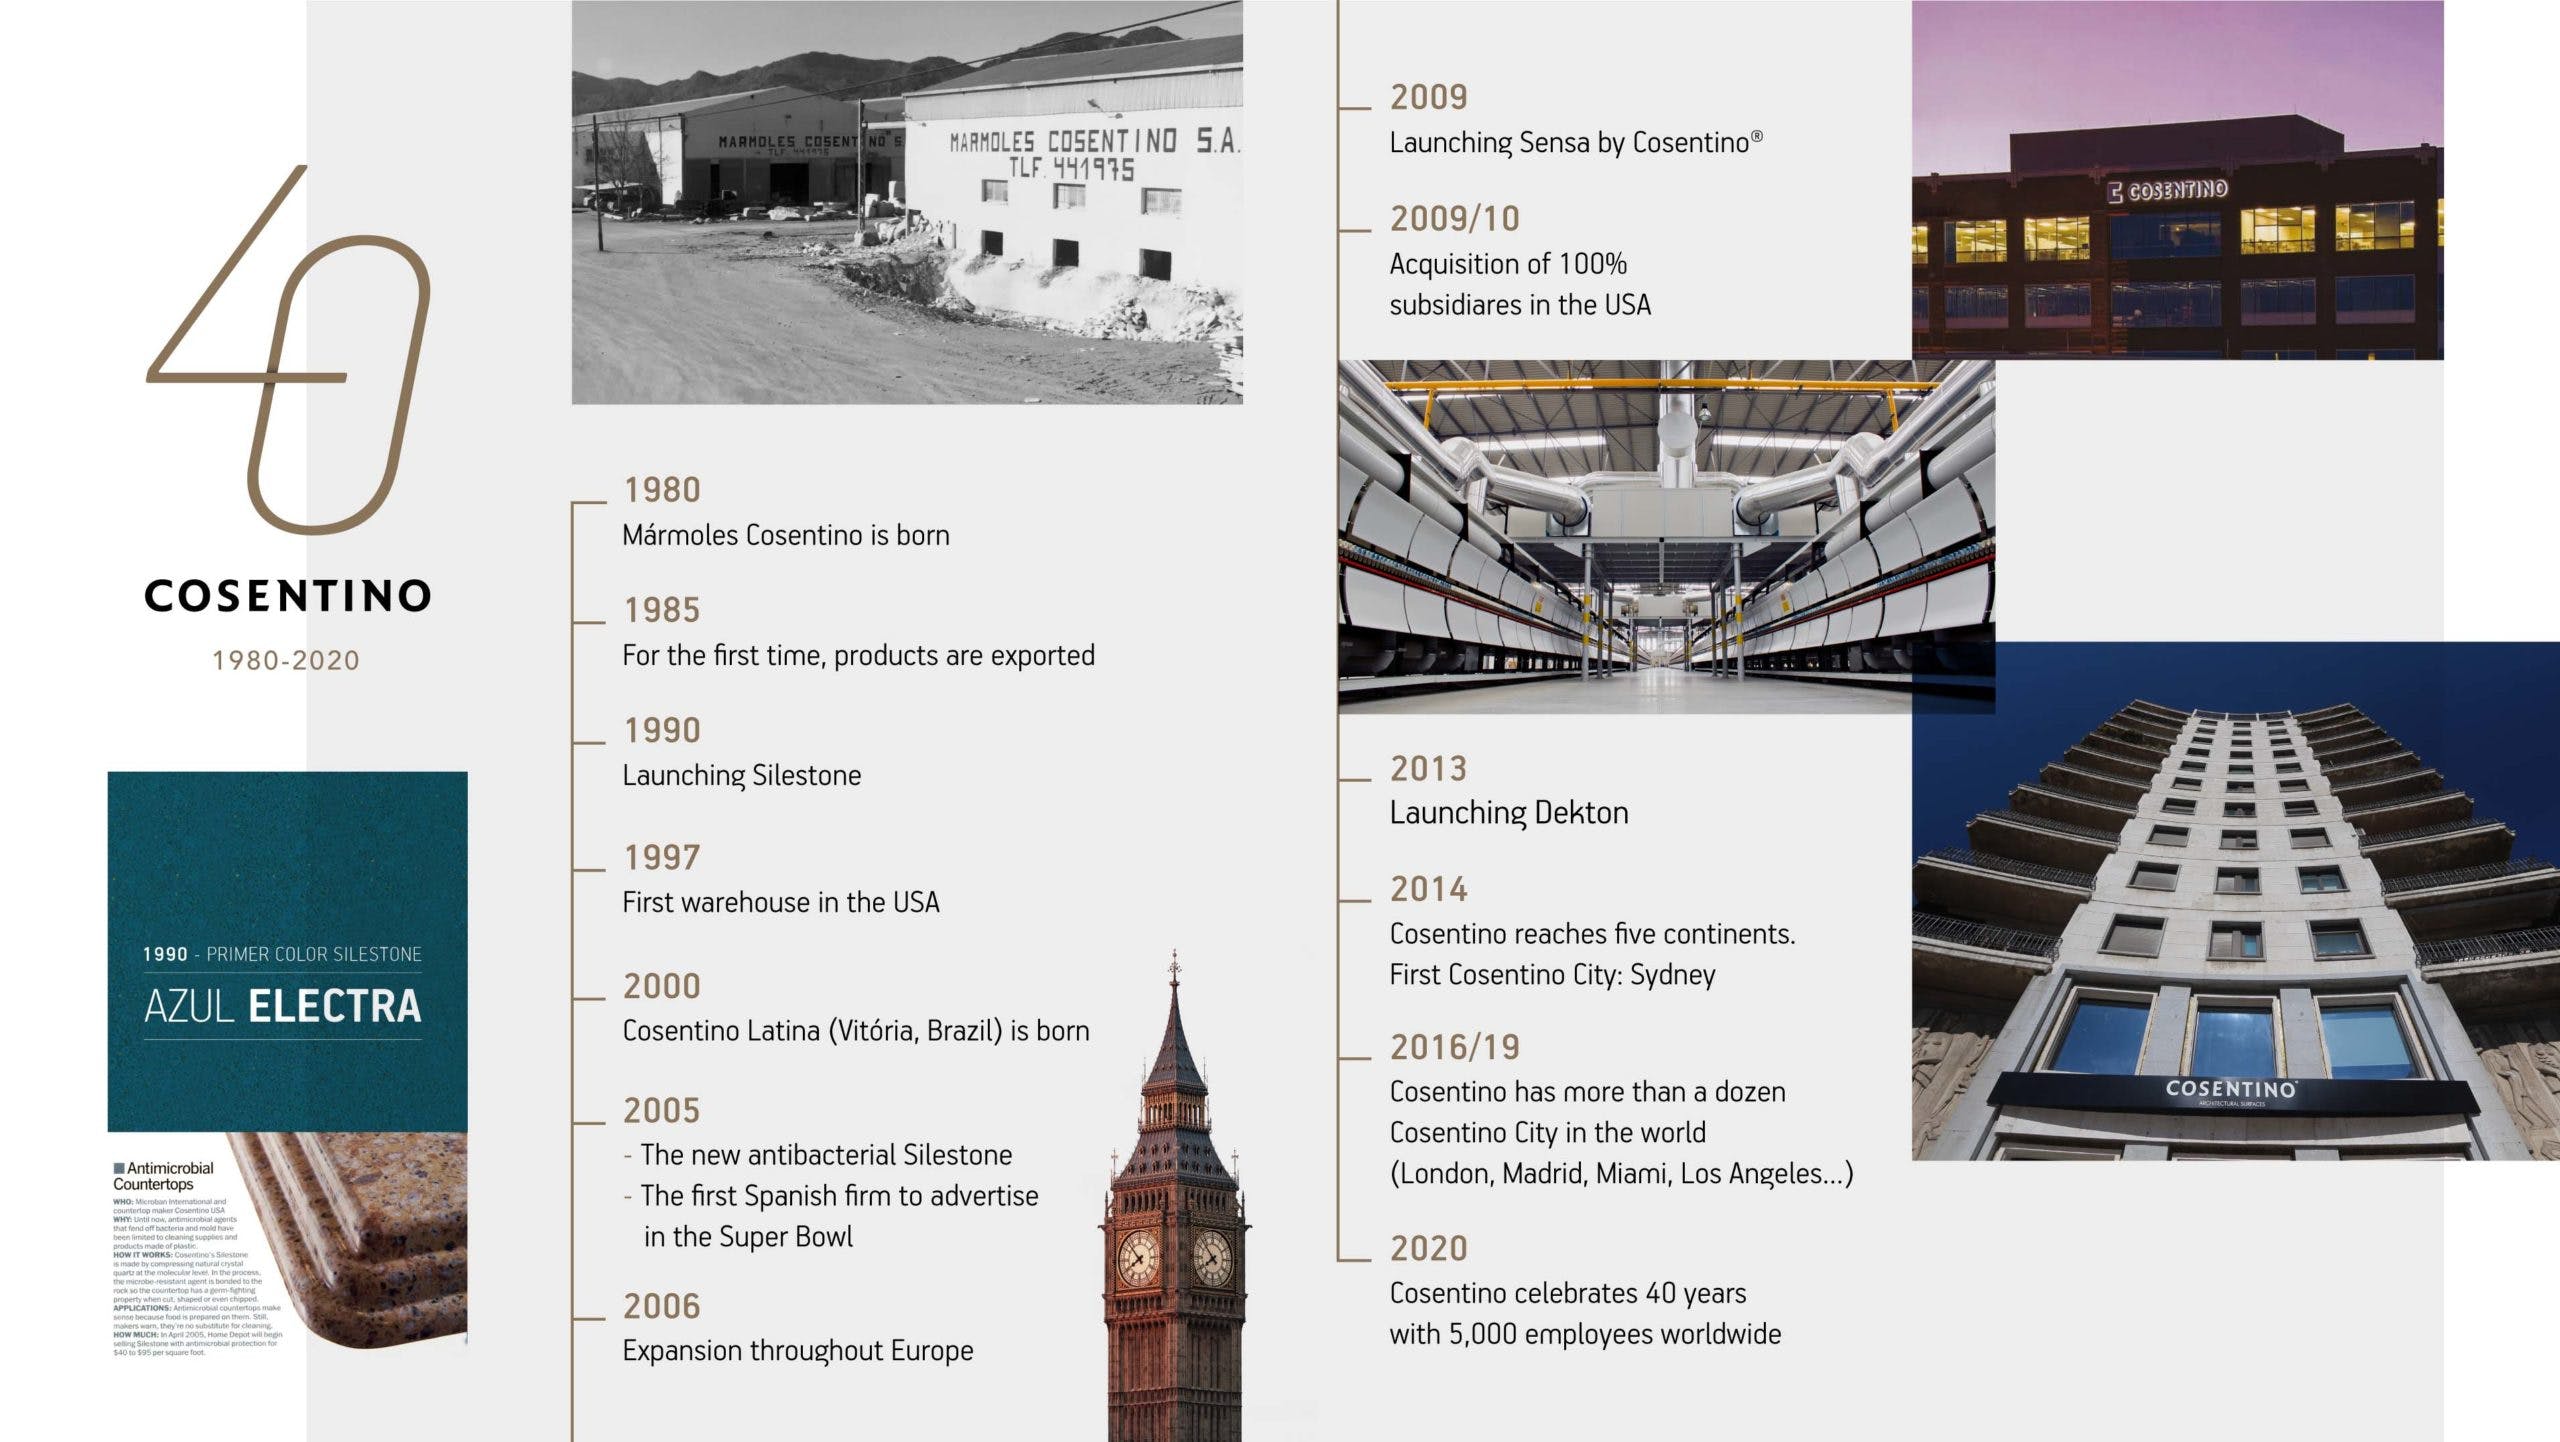 Image 34 of Timeline Cosentino 40 anniversary ENG scaled 1 in Cosentino, 40 years of international growth and expansion - Cosentino